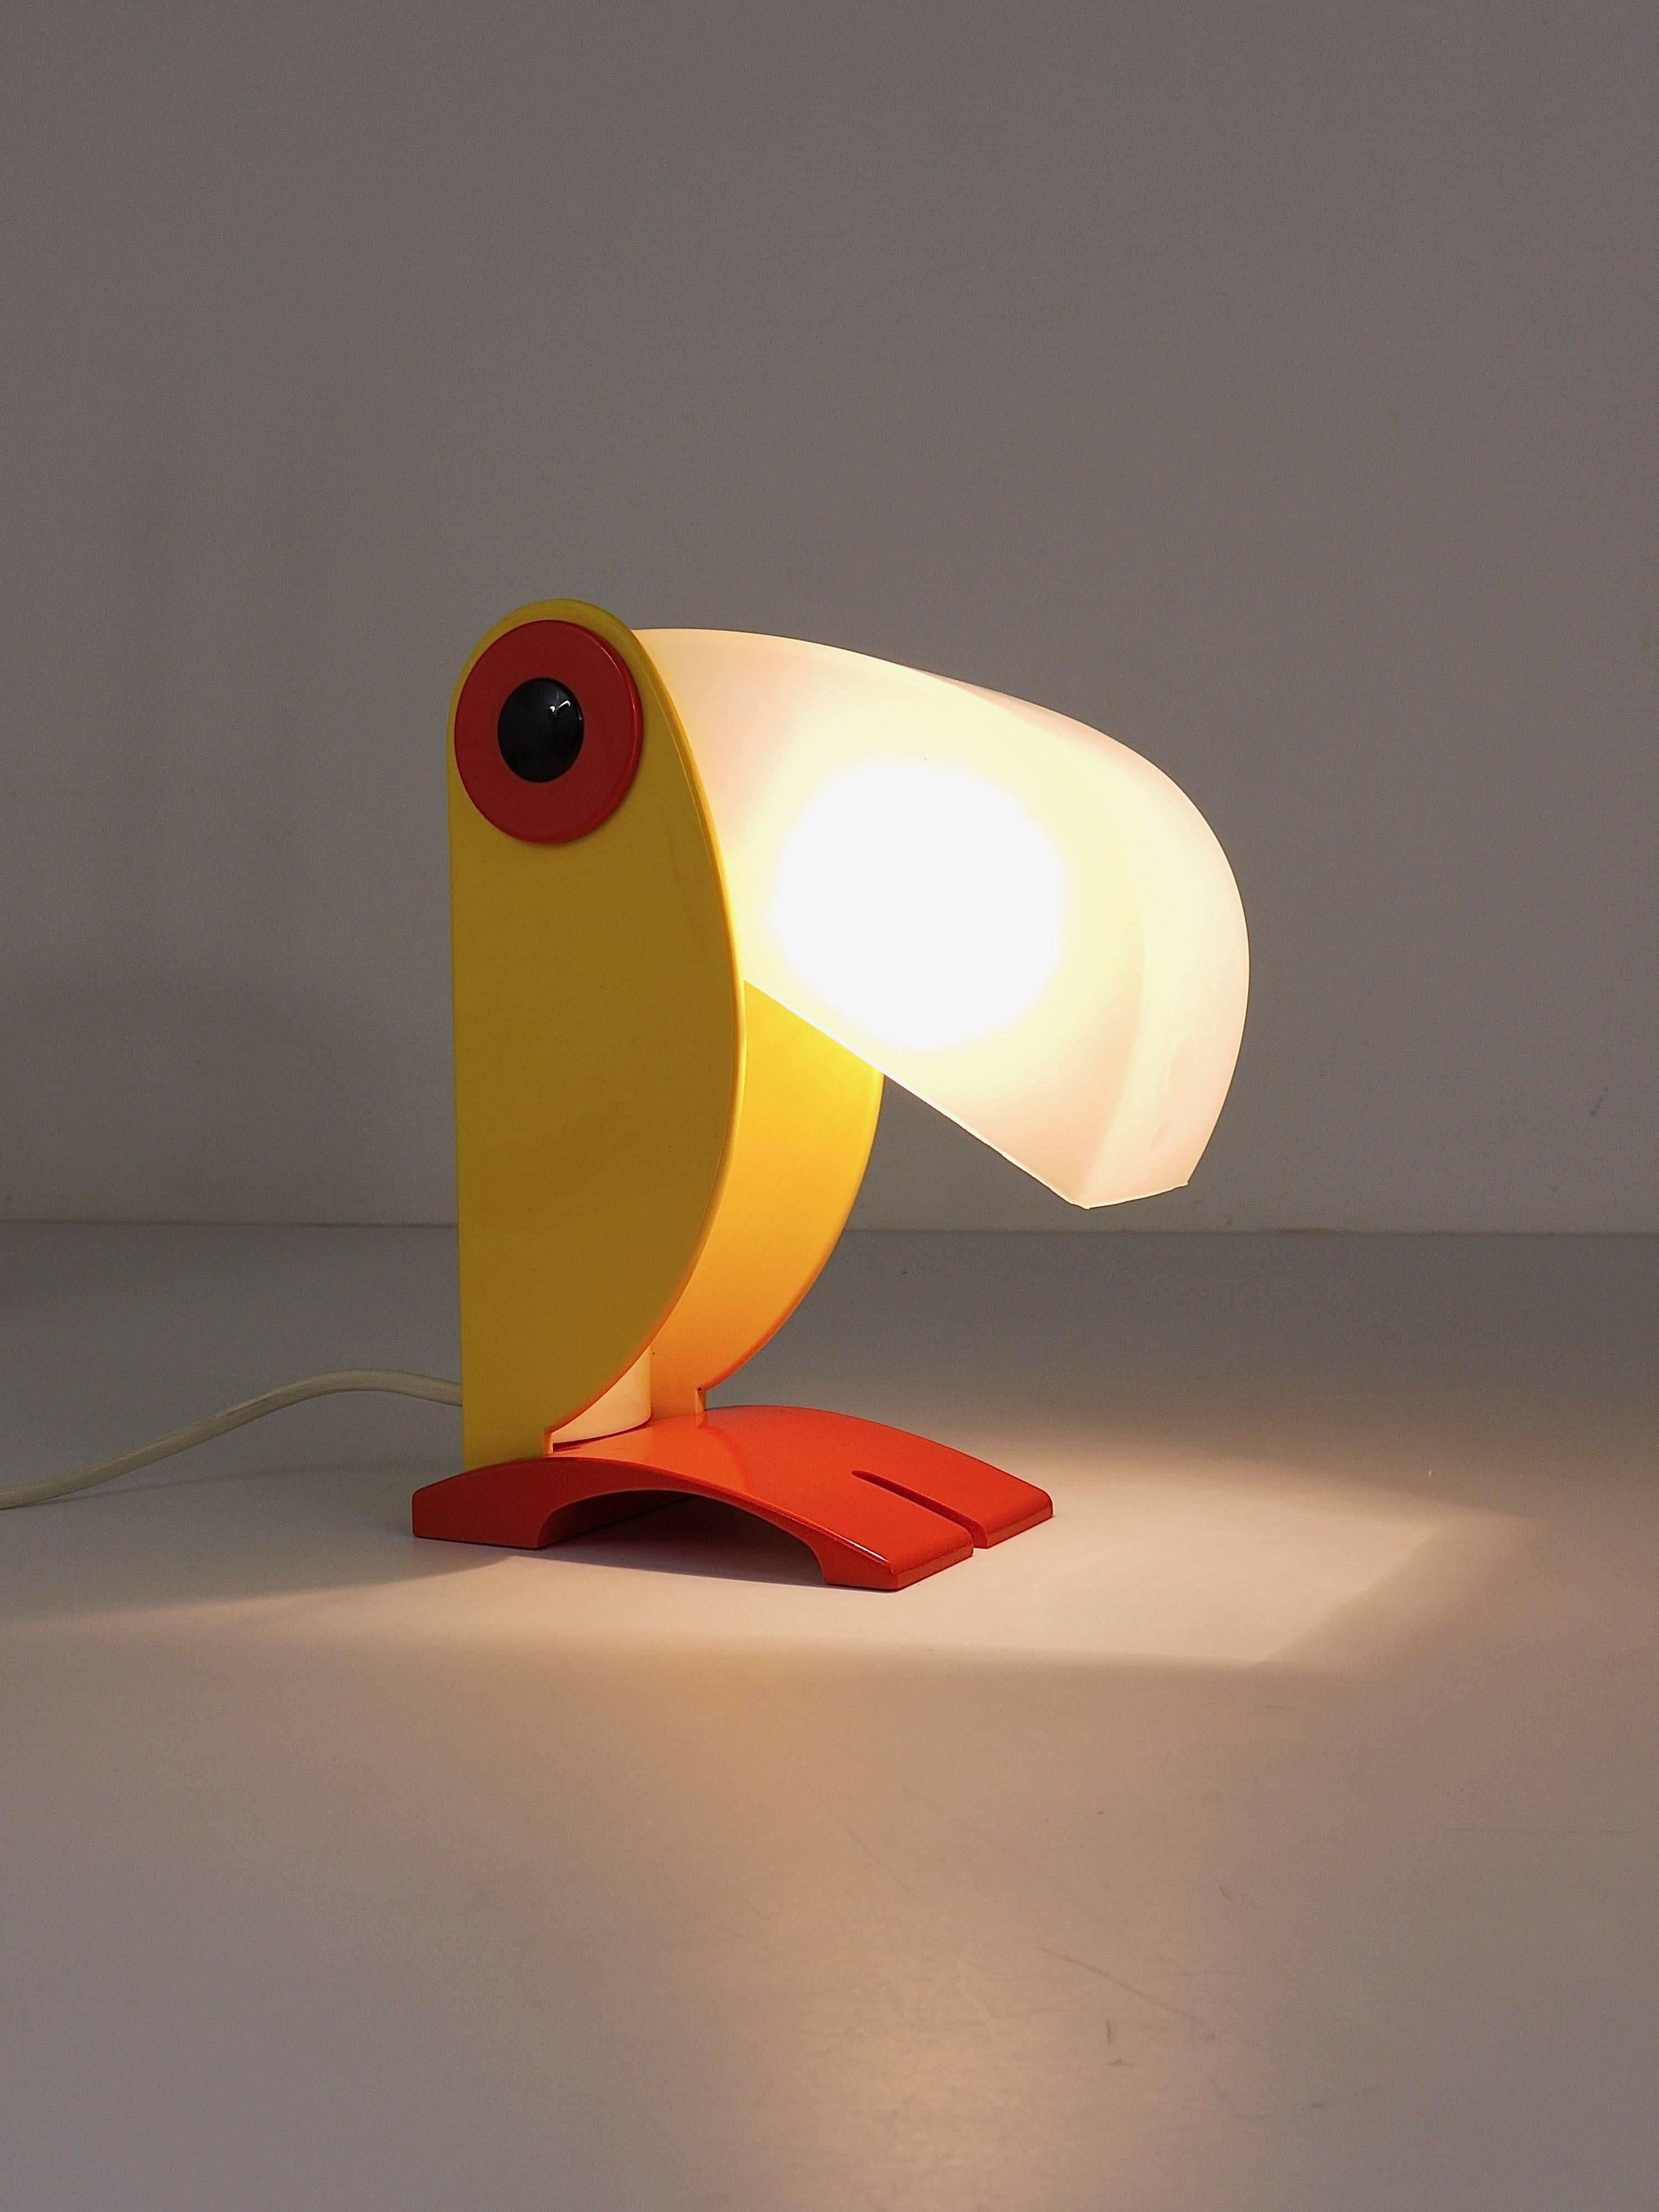 A charming table lamp displaying a toucan or parrot bird from the 1970s. Made of orange, yellow and white plastic. Designed by Steven Sclaroff, executed by OTF, Verona or Italy. Has an adjustable lampshade. In very good condition.

A charming